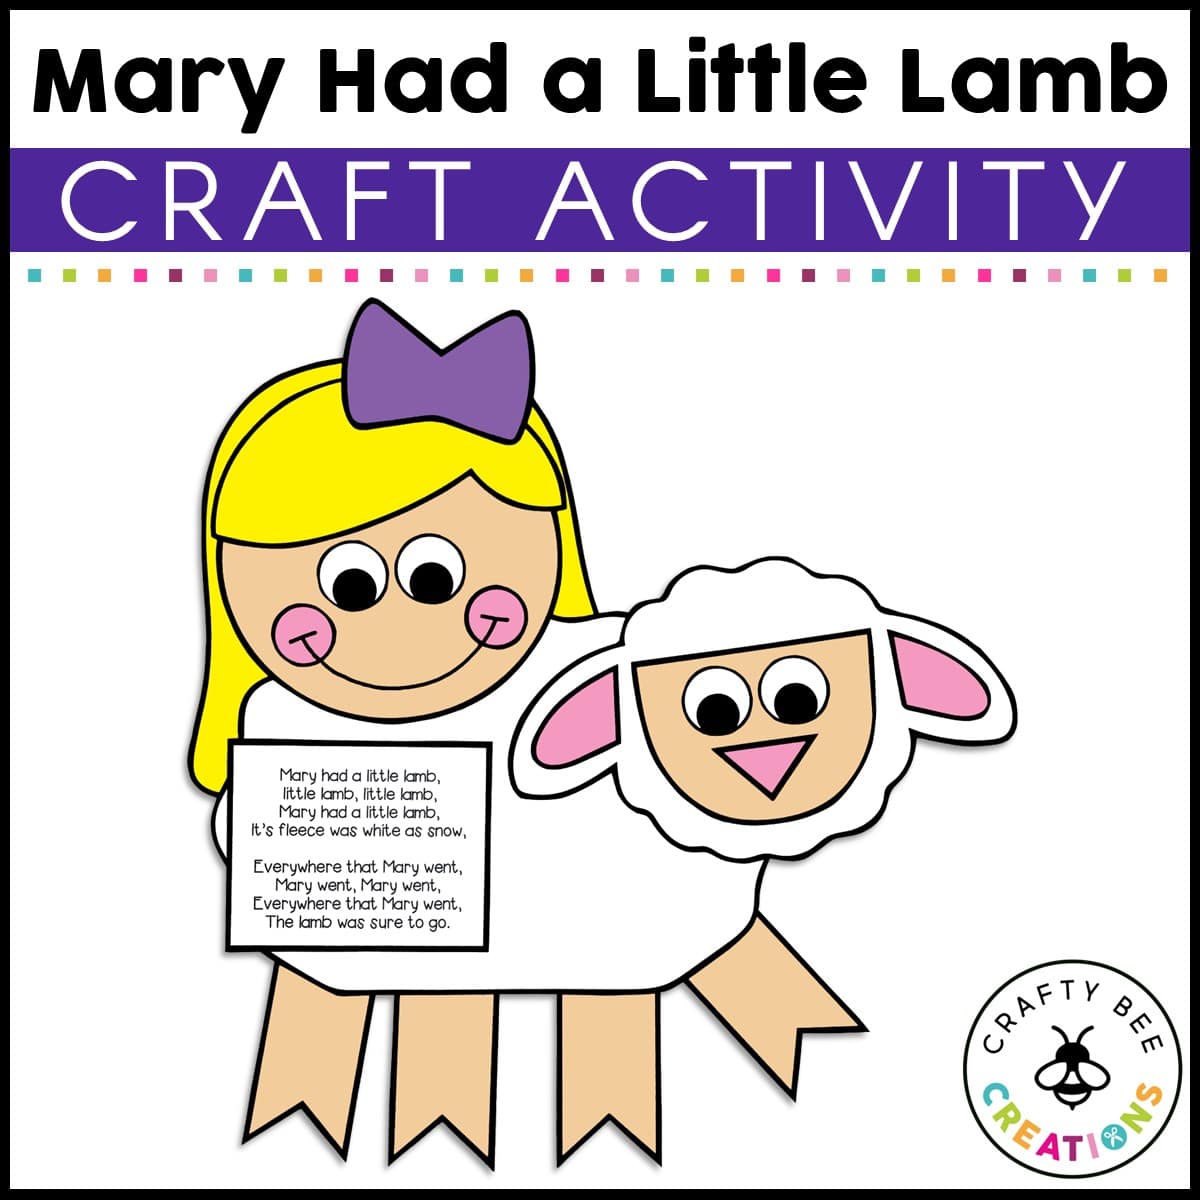 mary-had-a-little-lamb-craft-activity-crafty-bee-creations